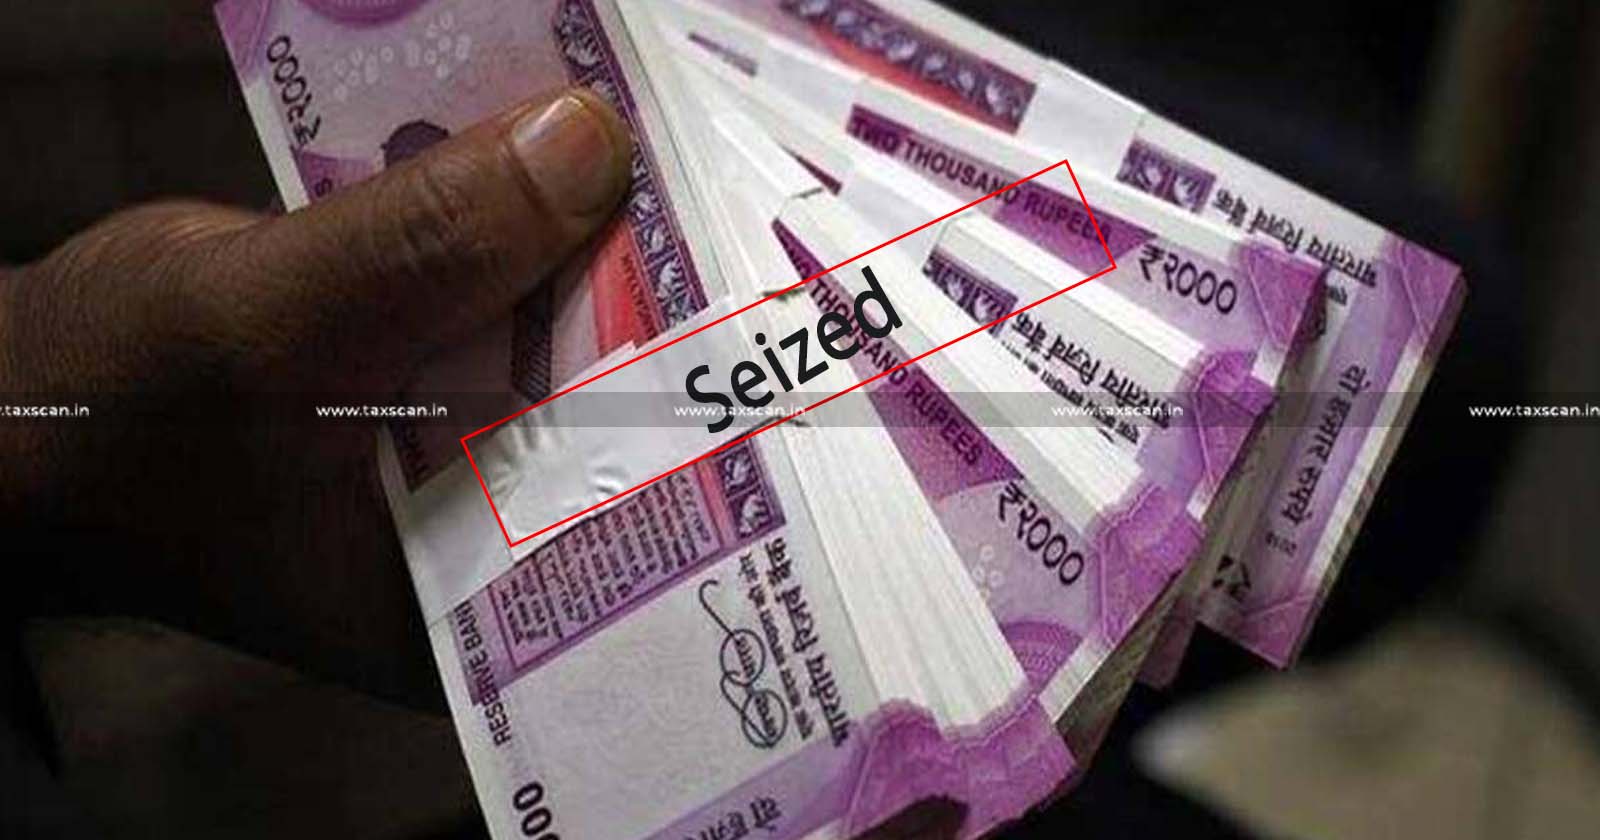 Retaining of Seized Cash - Demonetised 2000 Rs Note - Seized Cash - Issuing SCN - Kerala High Court - Release Cash - taxscan